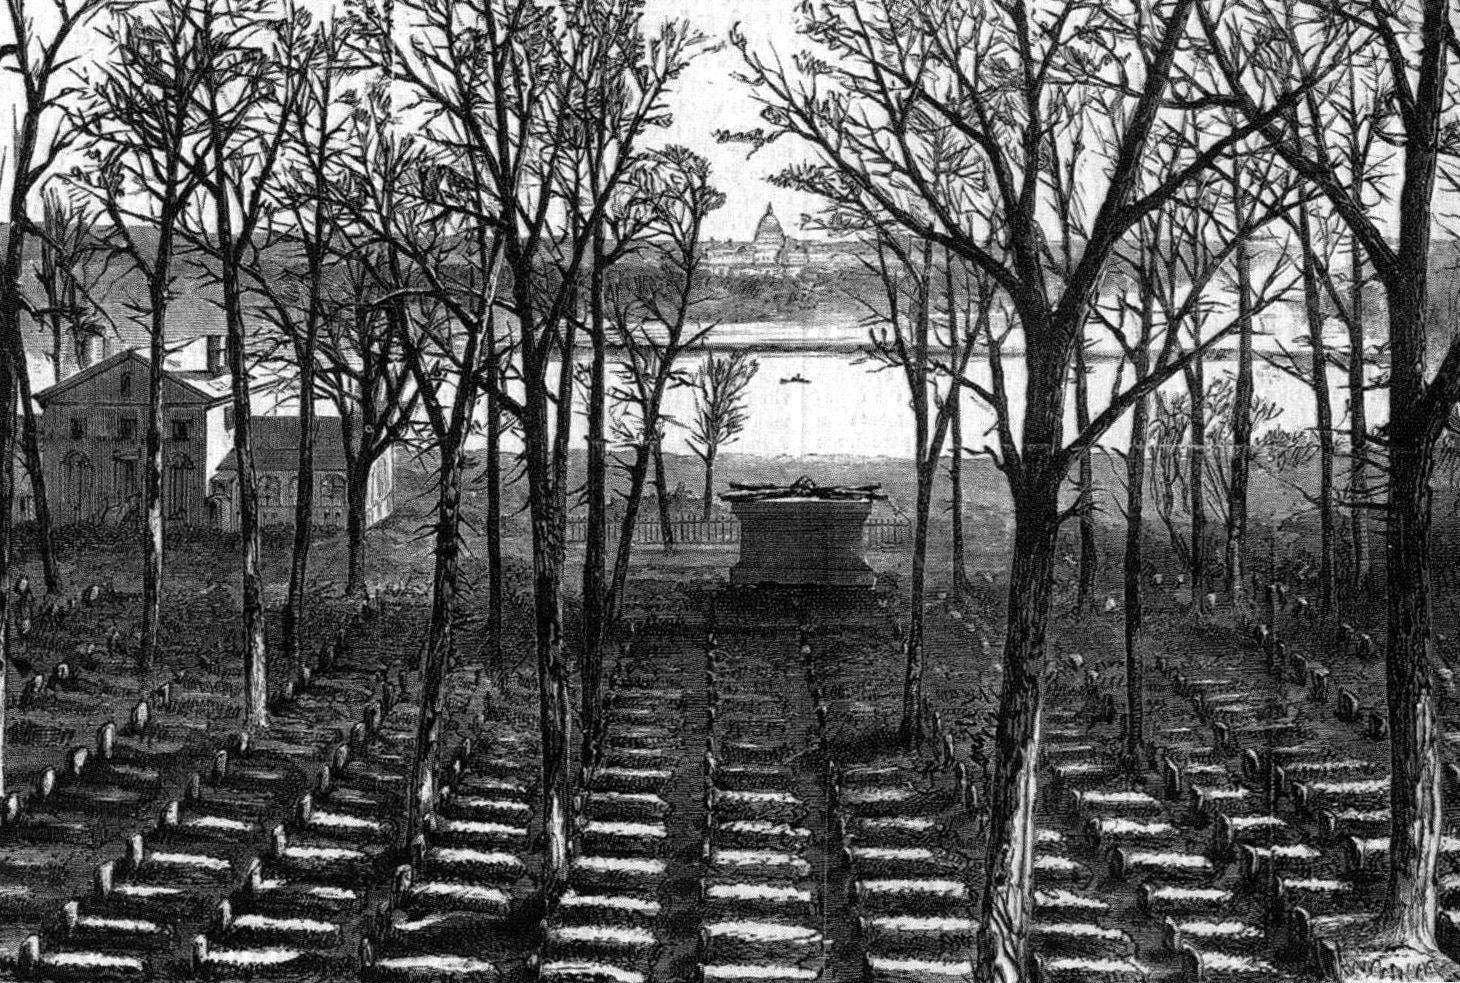 Partially in anger against his former friend’s decision to fight for the South, Quartermaster General Montgomery C. Meigs ordered thousands of Union dead buried at Arlington House, personally selecting the site behind Mrs. Custis’s gardens for a mass grave of unknown soldiers (above).